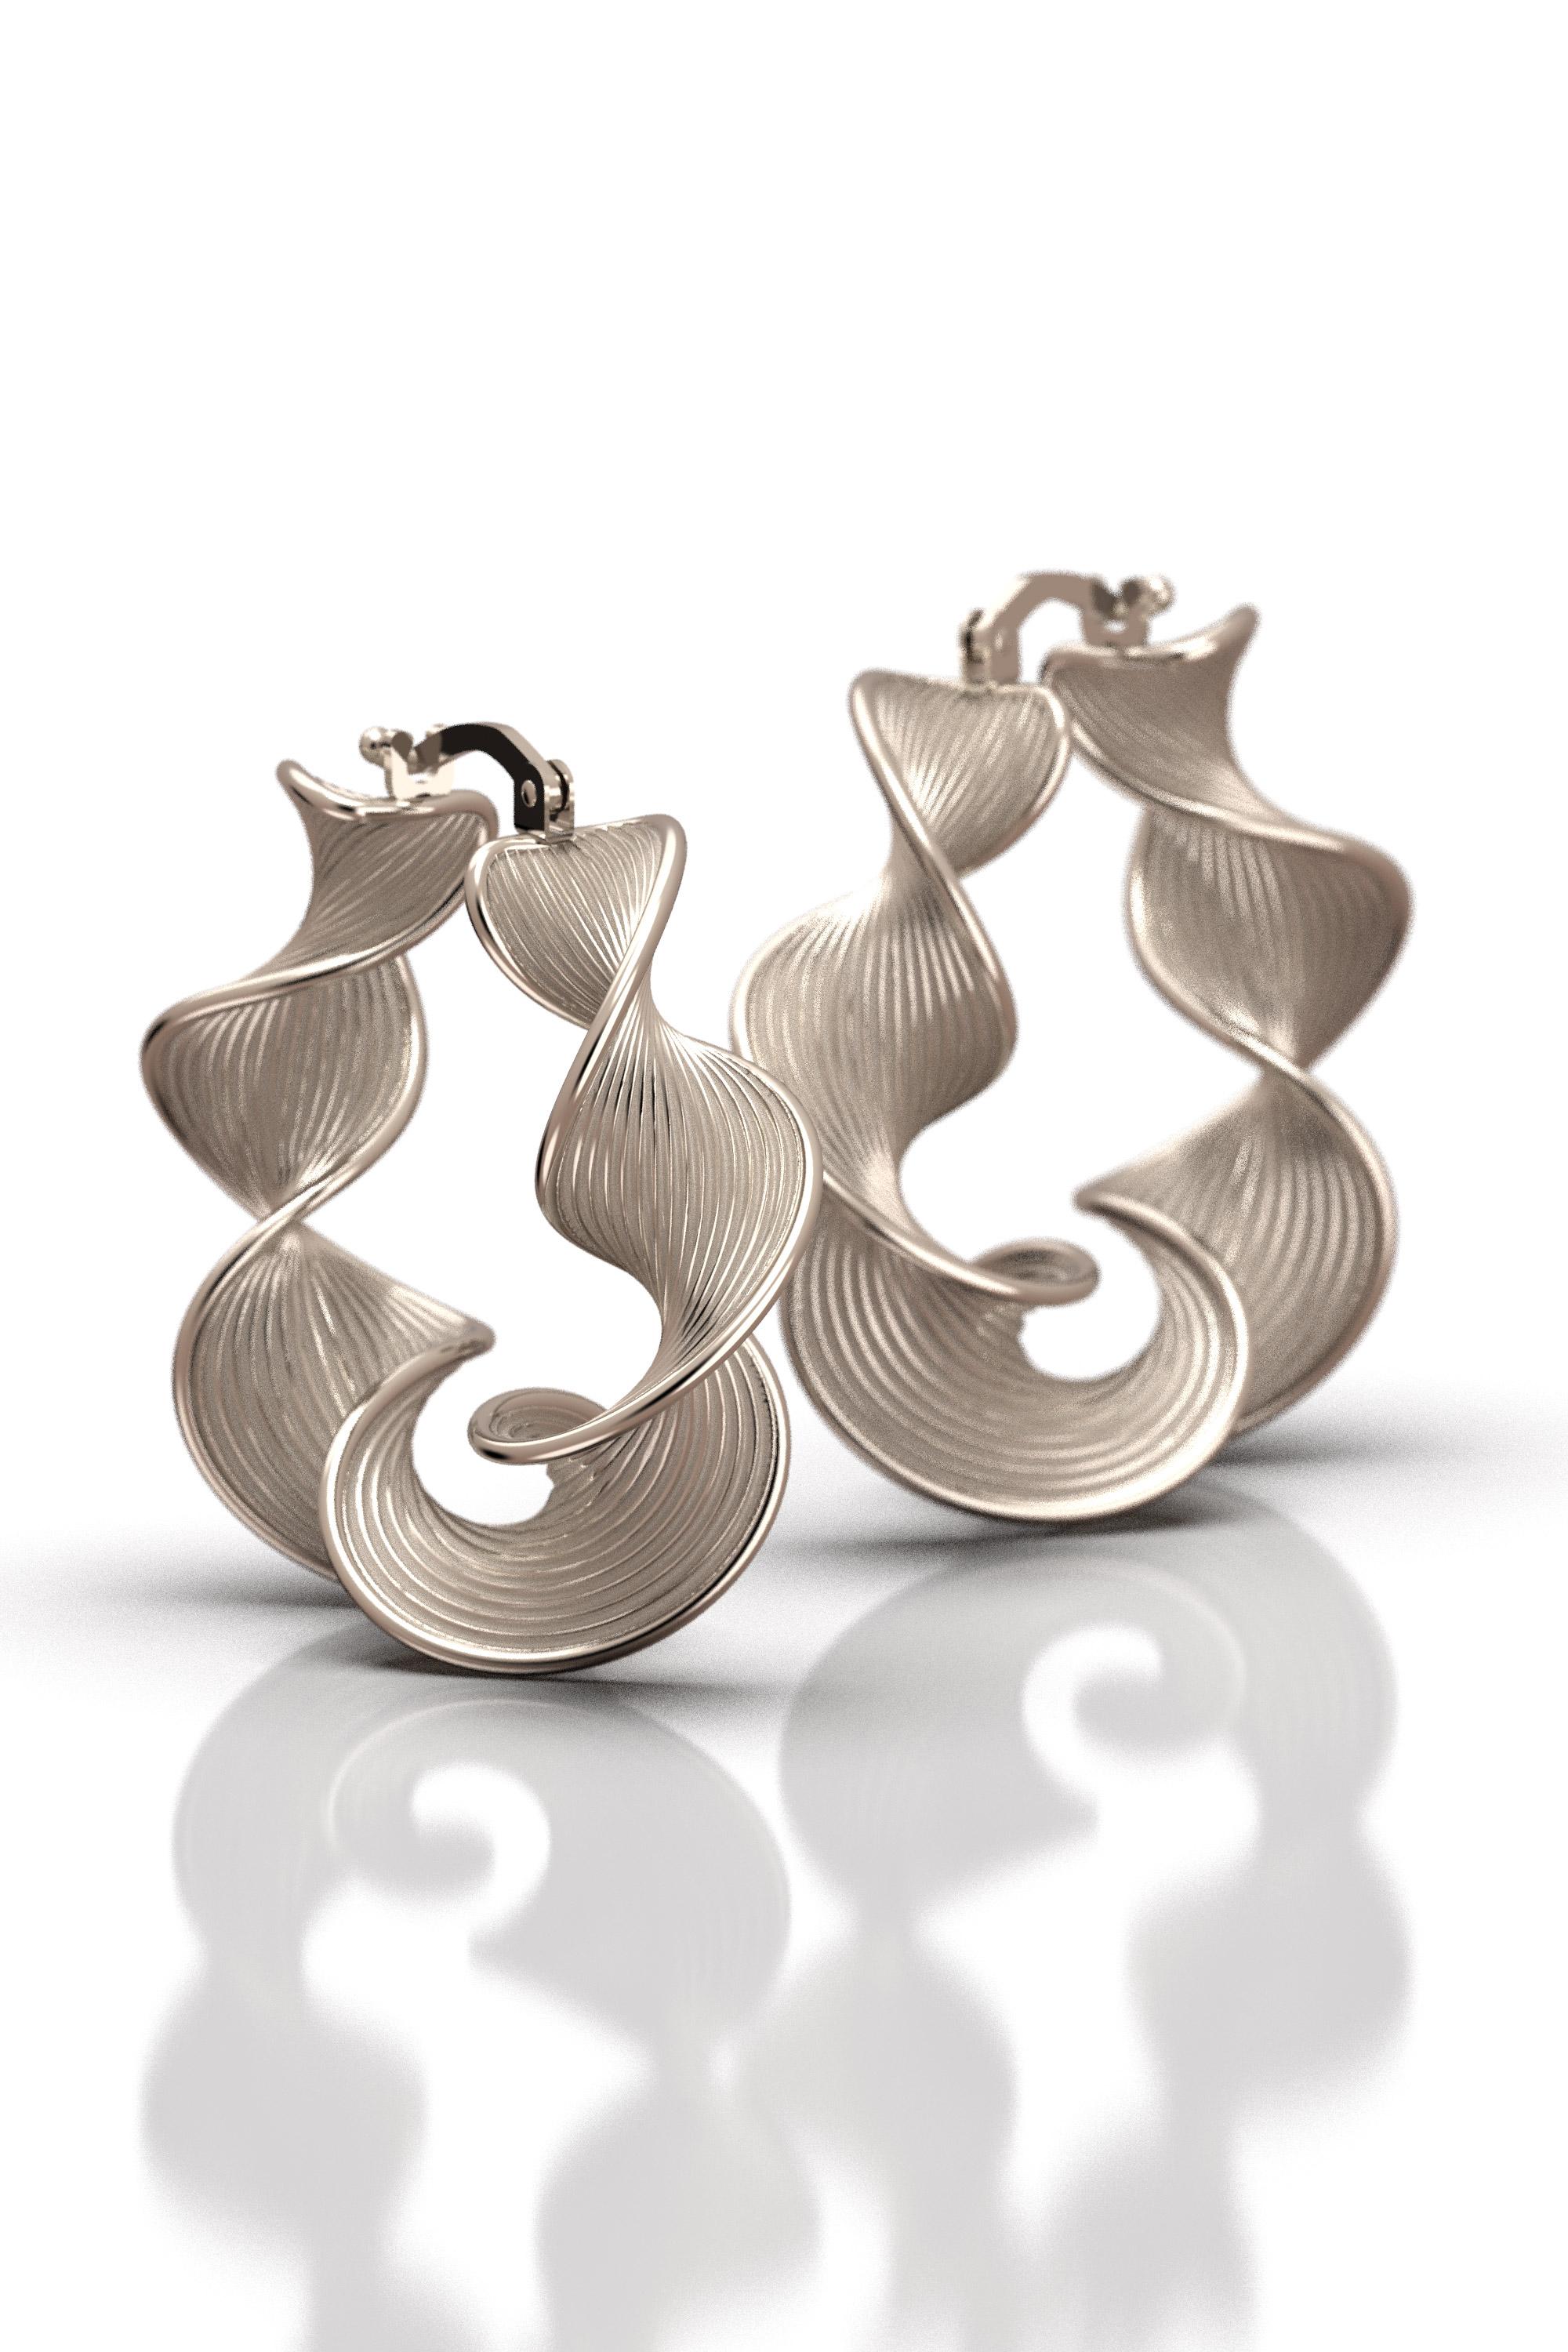 Oltremare Gioielli  14k Twisted Gold Hoop Earrings Designed and Crafted in Italy For Sale 5